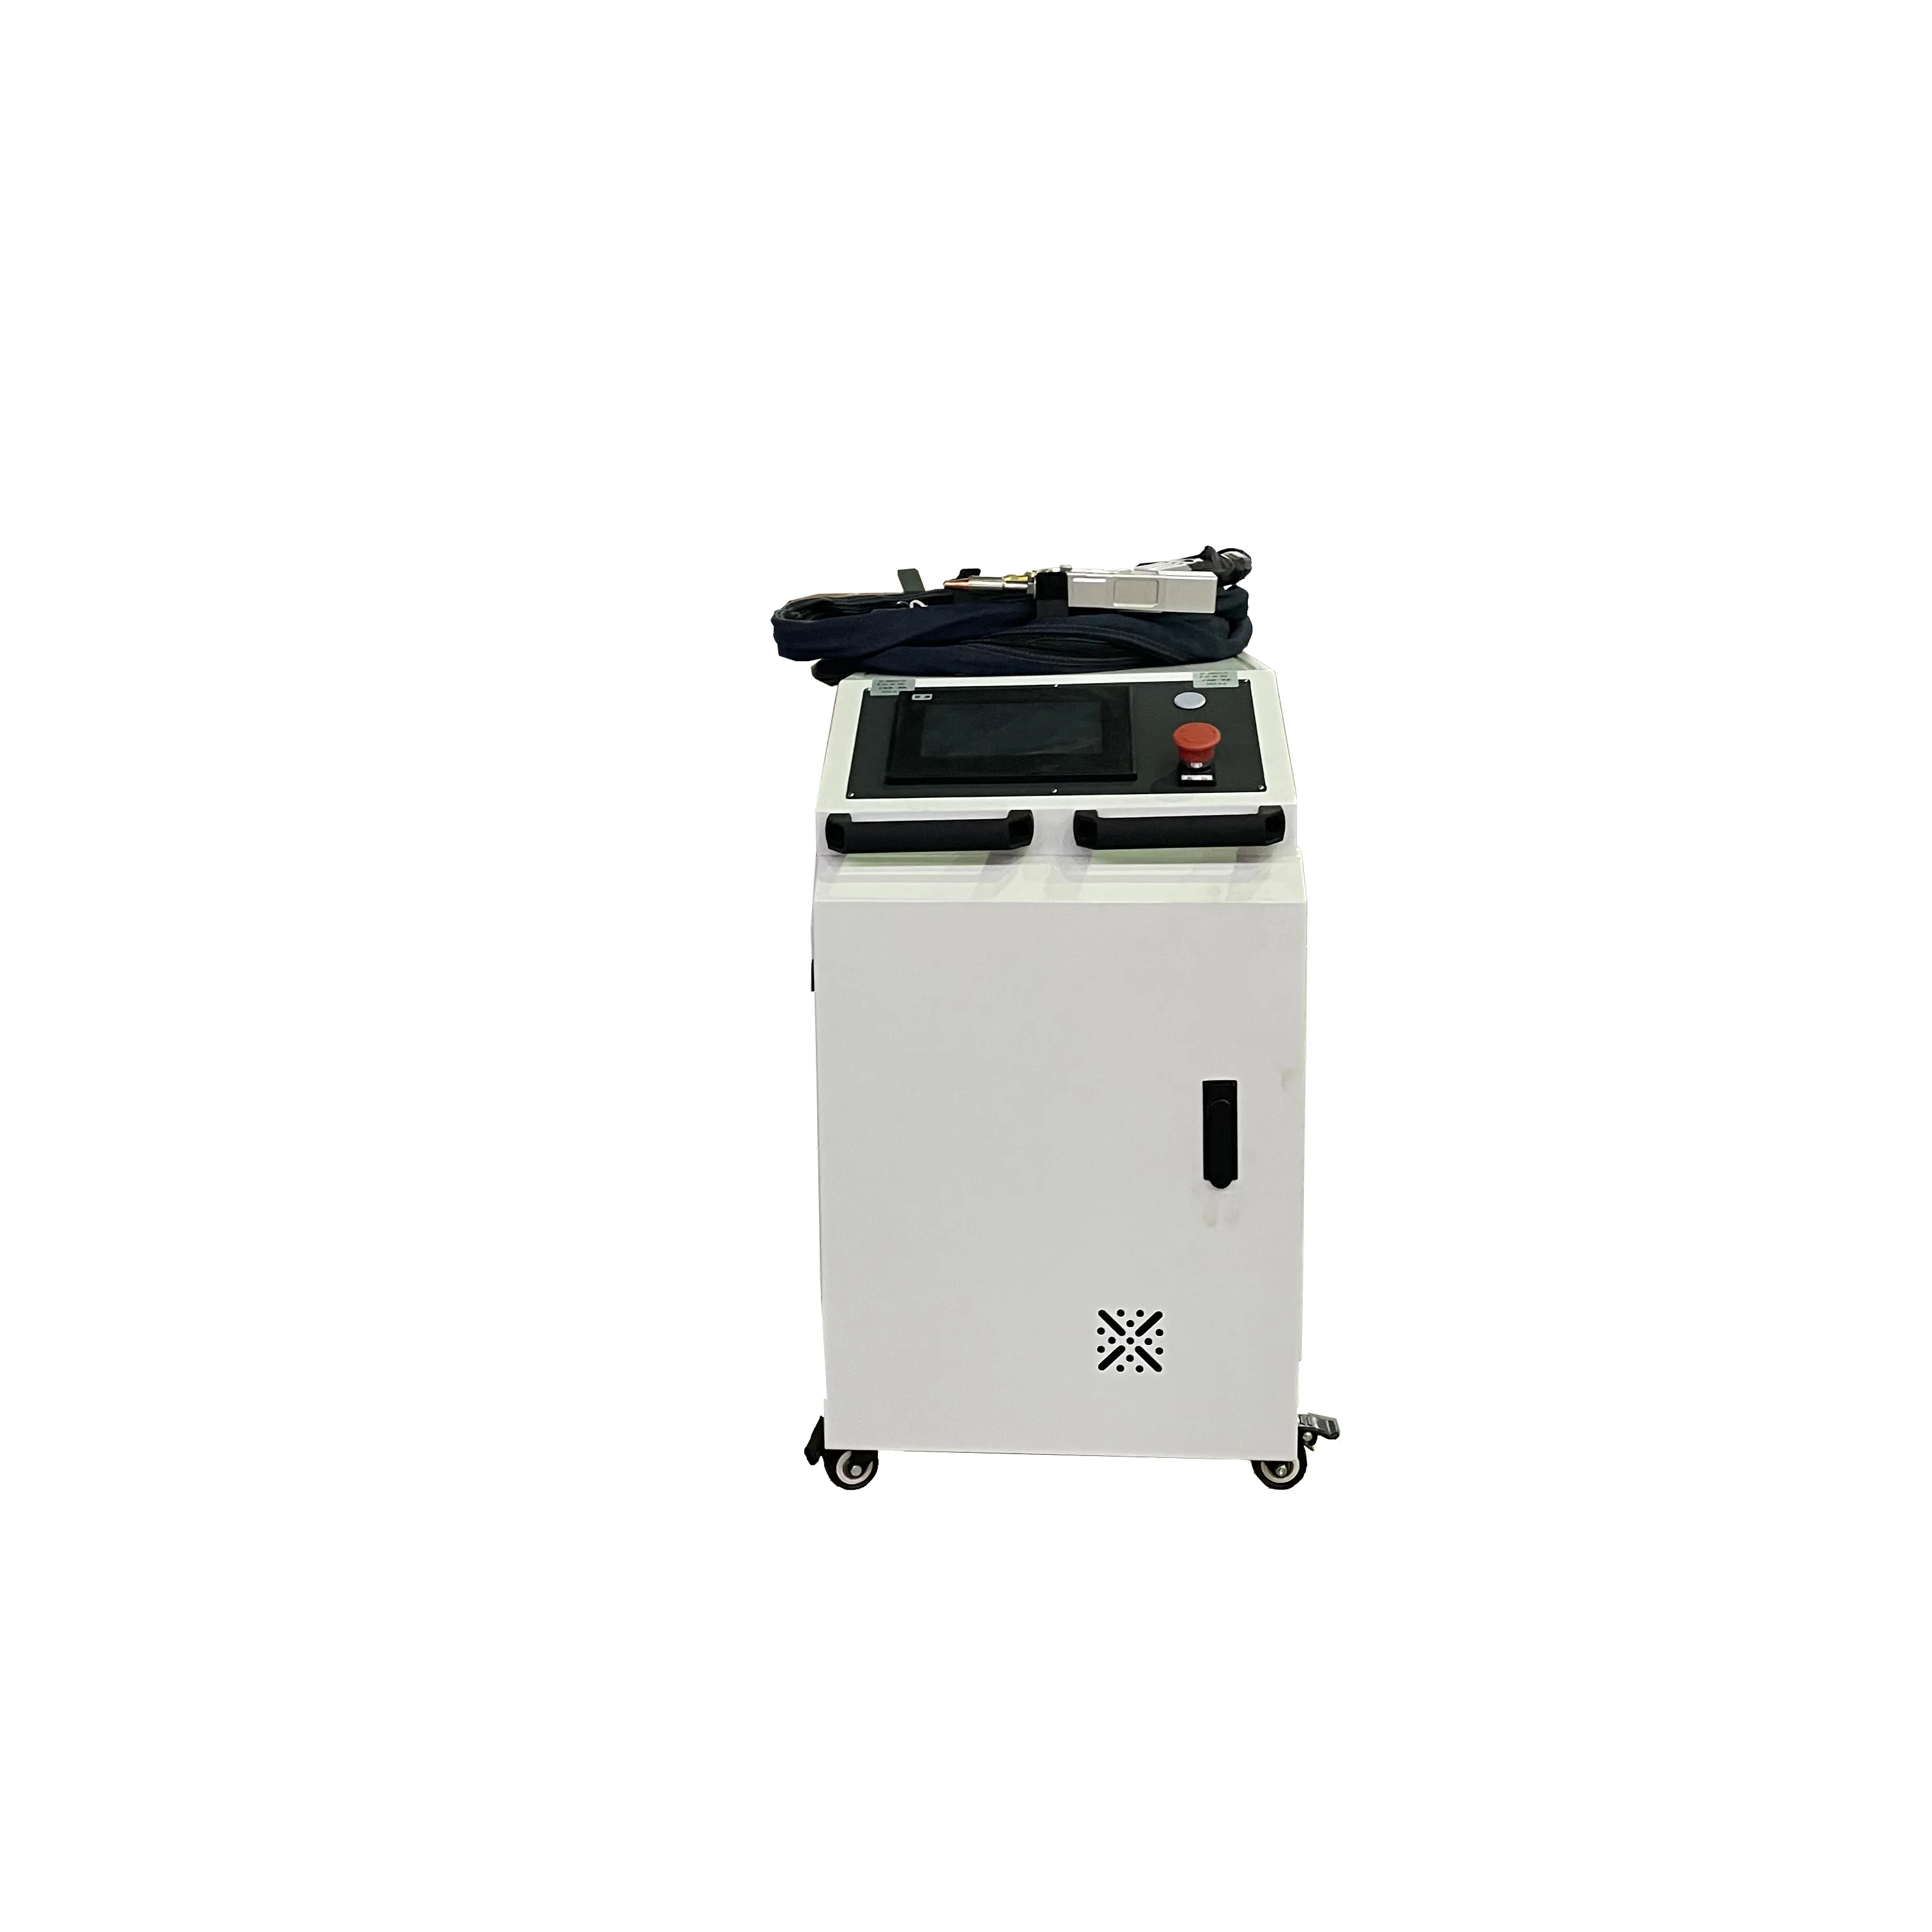 Quots for 1000W /1500W /2000W Portable Carbon/ Stainless Steel/ Iron / Aluminum Handheld Fiber Laser Welding Machine Price